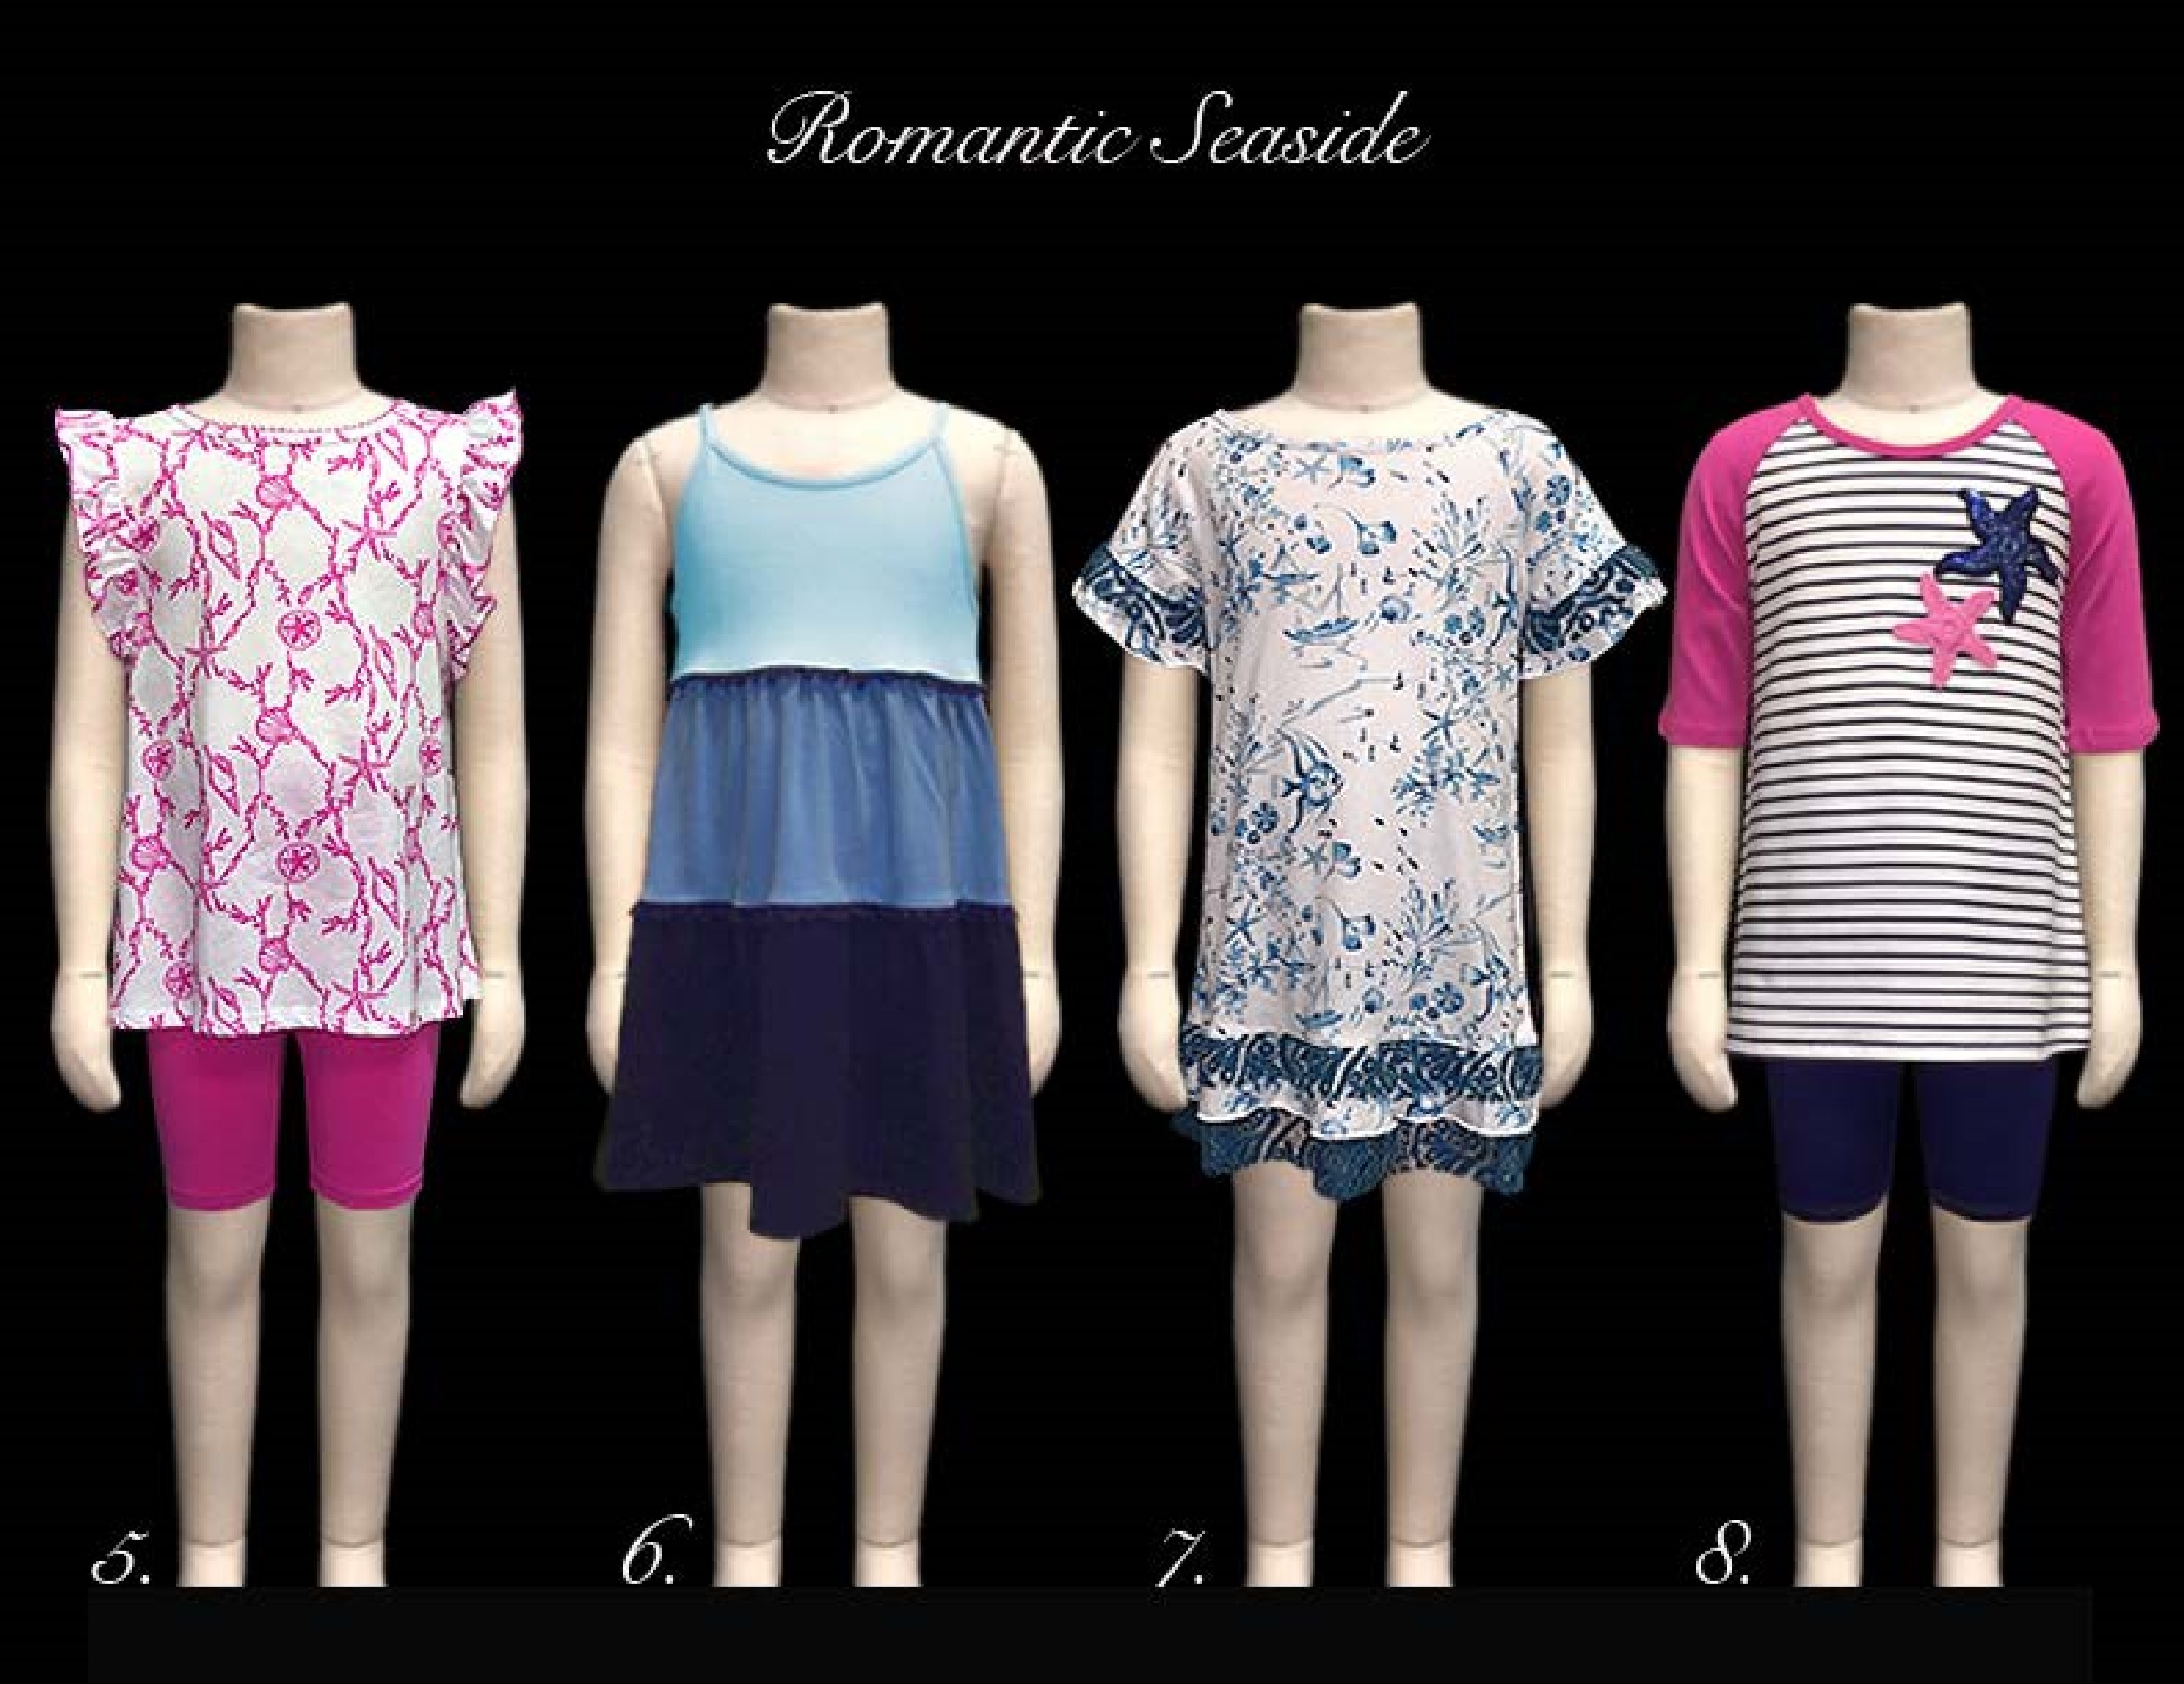 Romantic Seaside Collection 2